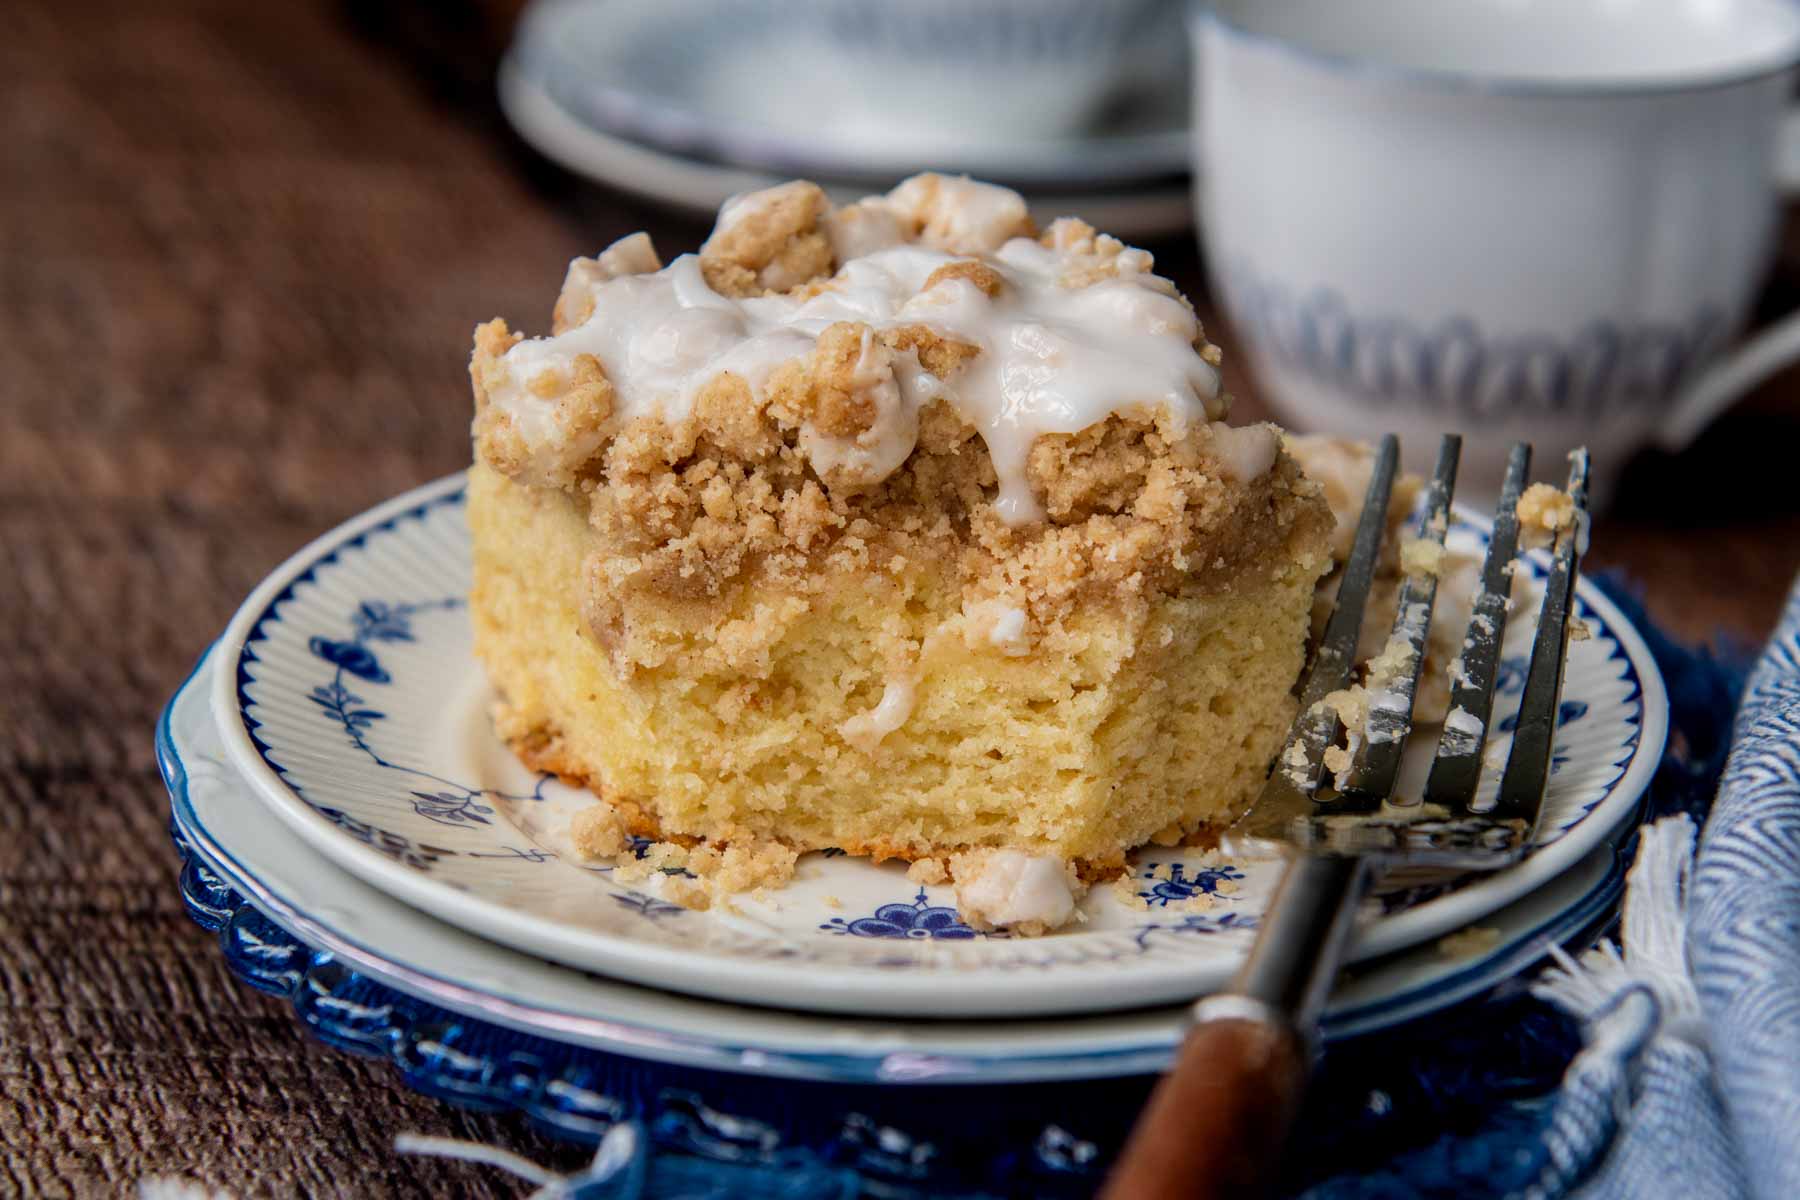 a slice of coffee cake on a blue plate with a bite taken out